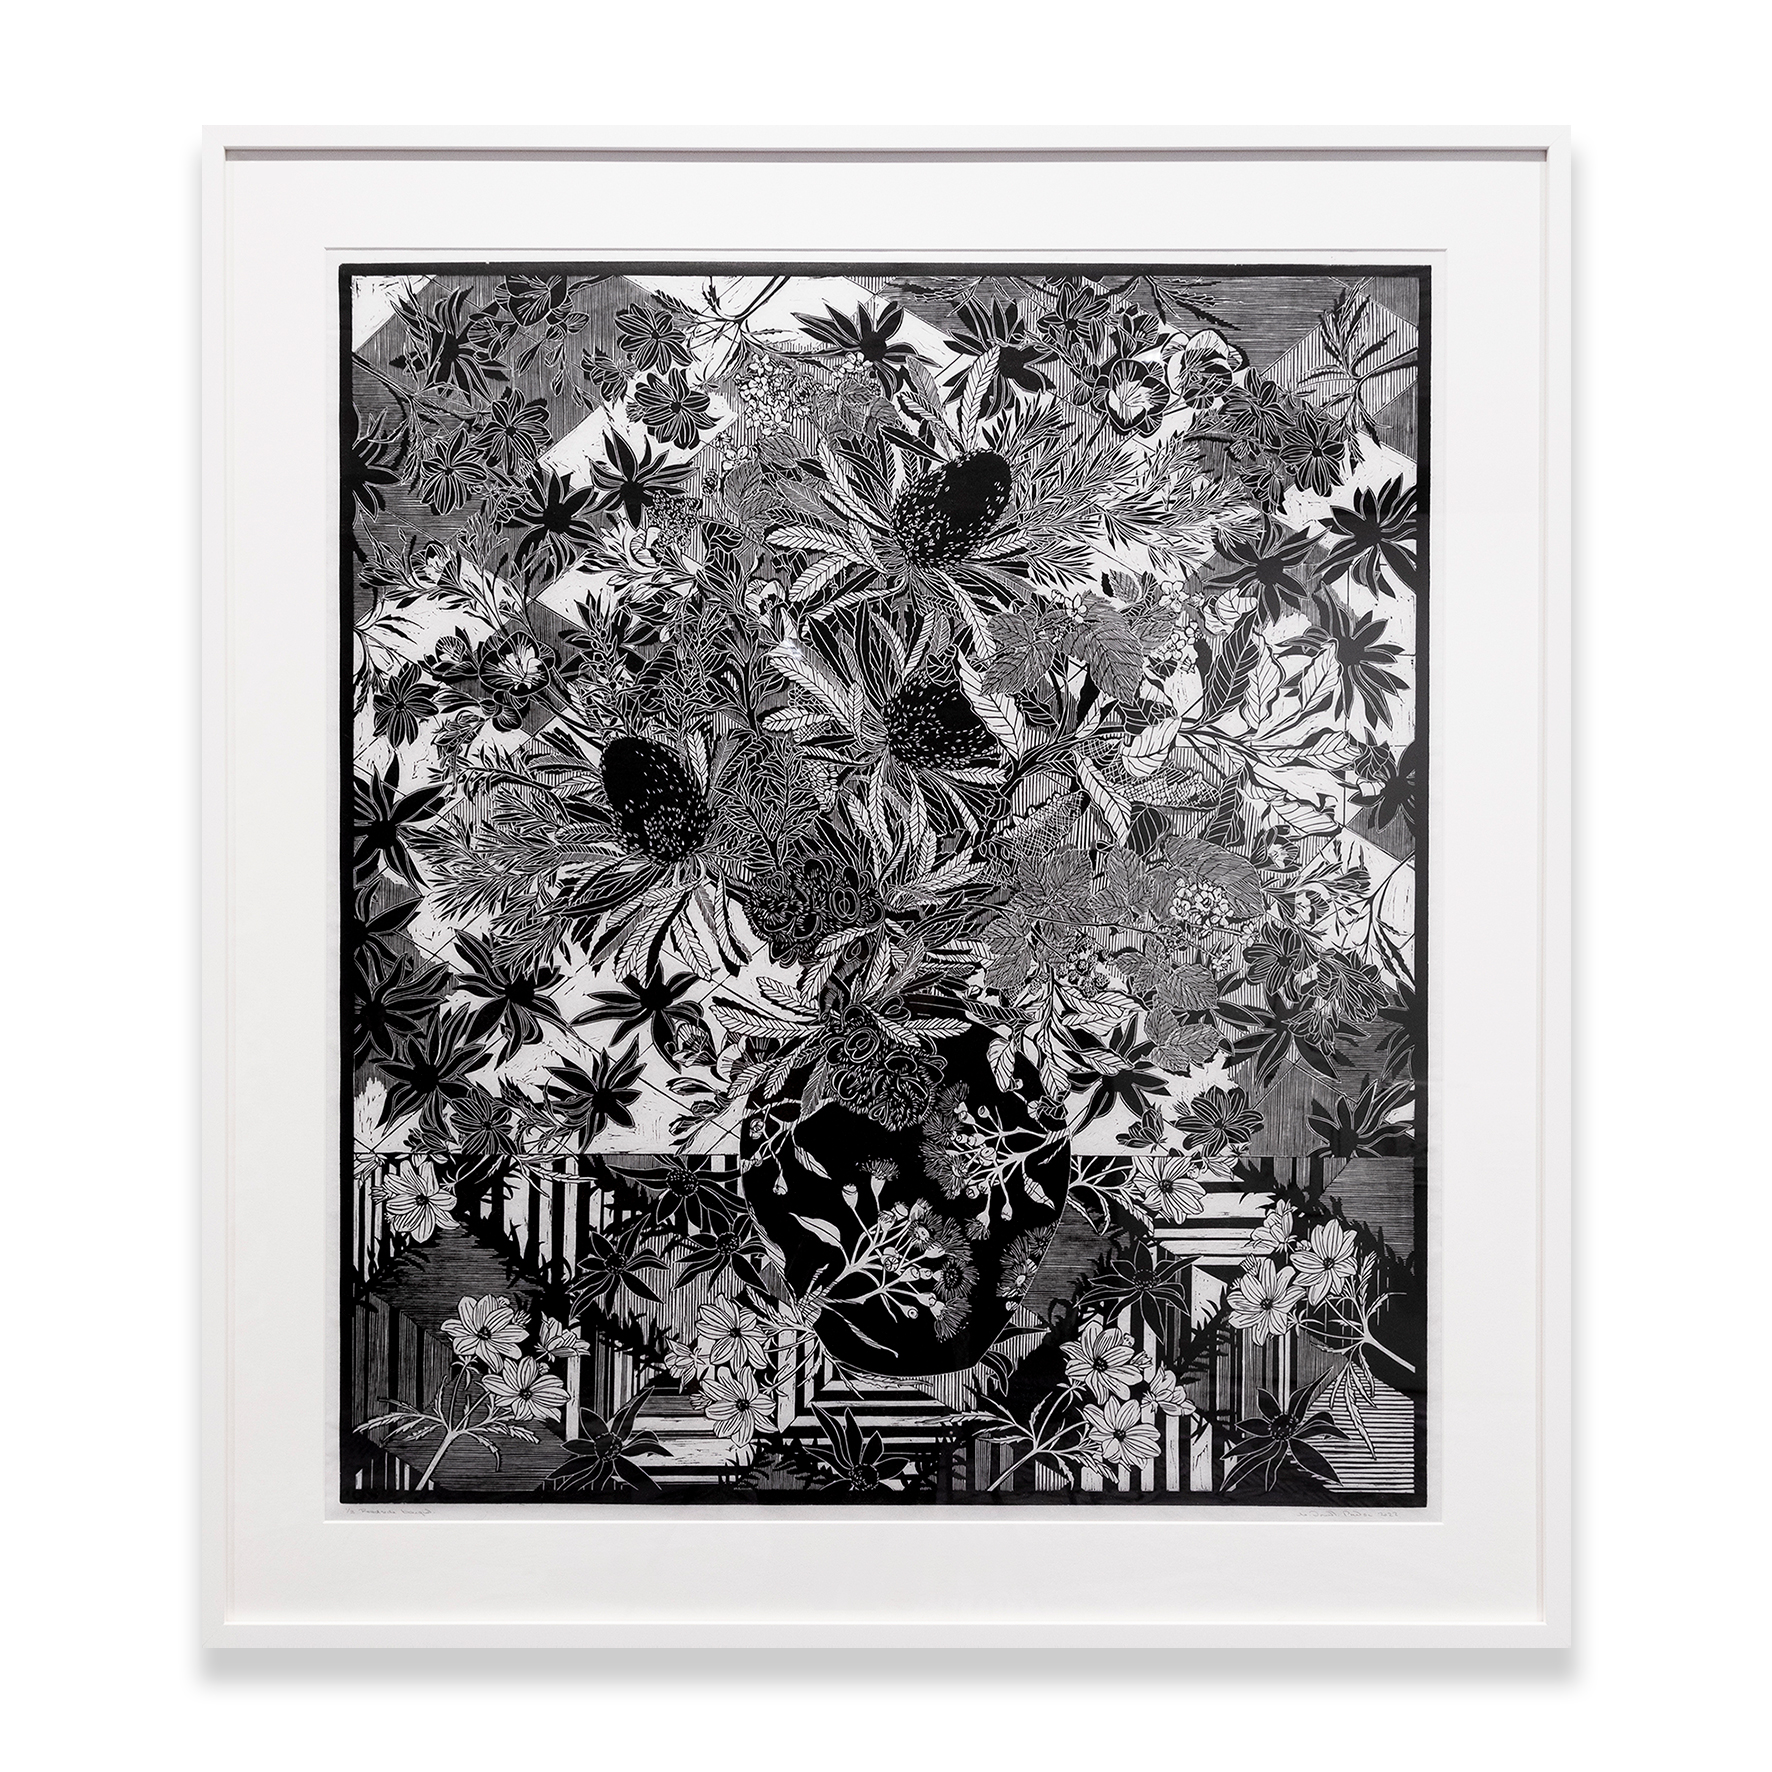 Christine Druitt Preston: Roadside Bouquet 1/3, 2022. (Framed) Hand rubbed Lino block print edition on Wenzhou paper, printed by Artist with a limited edition of 3. Framed Size: 120x107x7cm (Perspex).